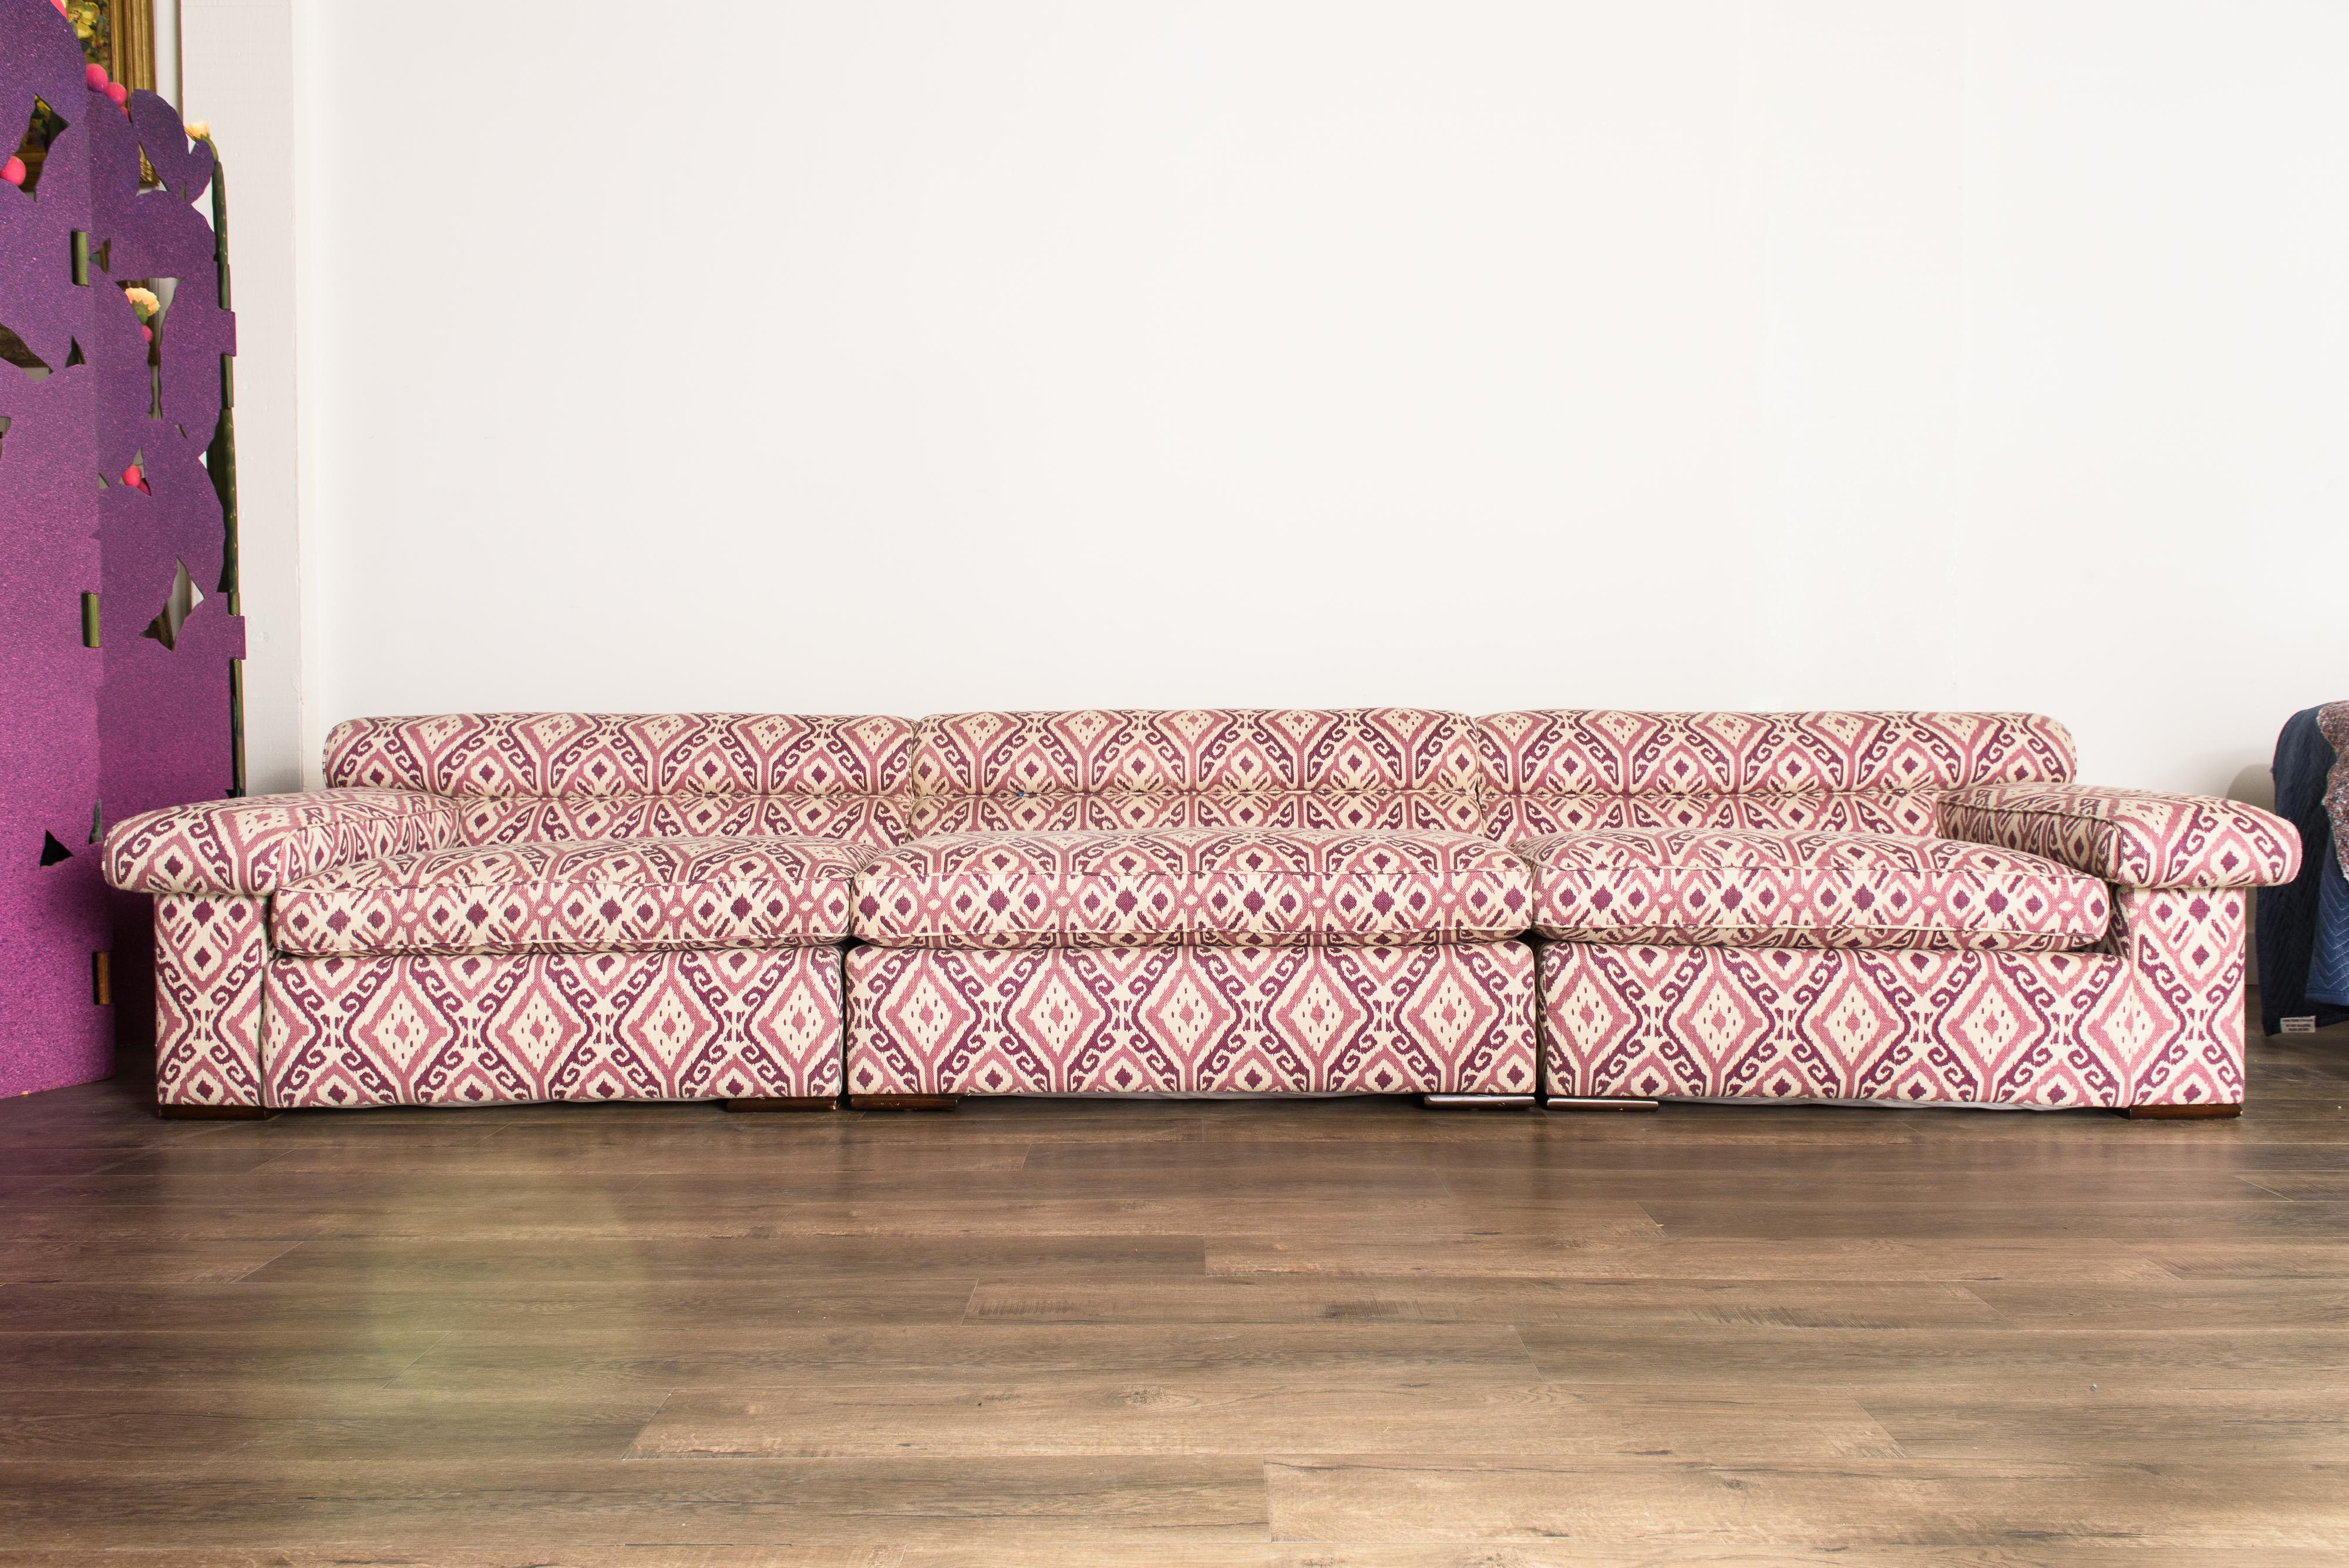 This modular lightly curved sectional sofa attributed to Paul Laszlo features three sections that can be arranged in several different ways, reupholstered in a gorgeous pink and plum colored ikat fabric which is in excellent like-new condition, only